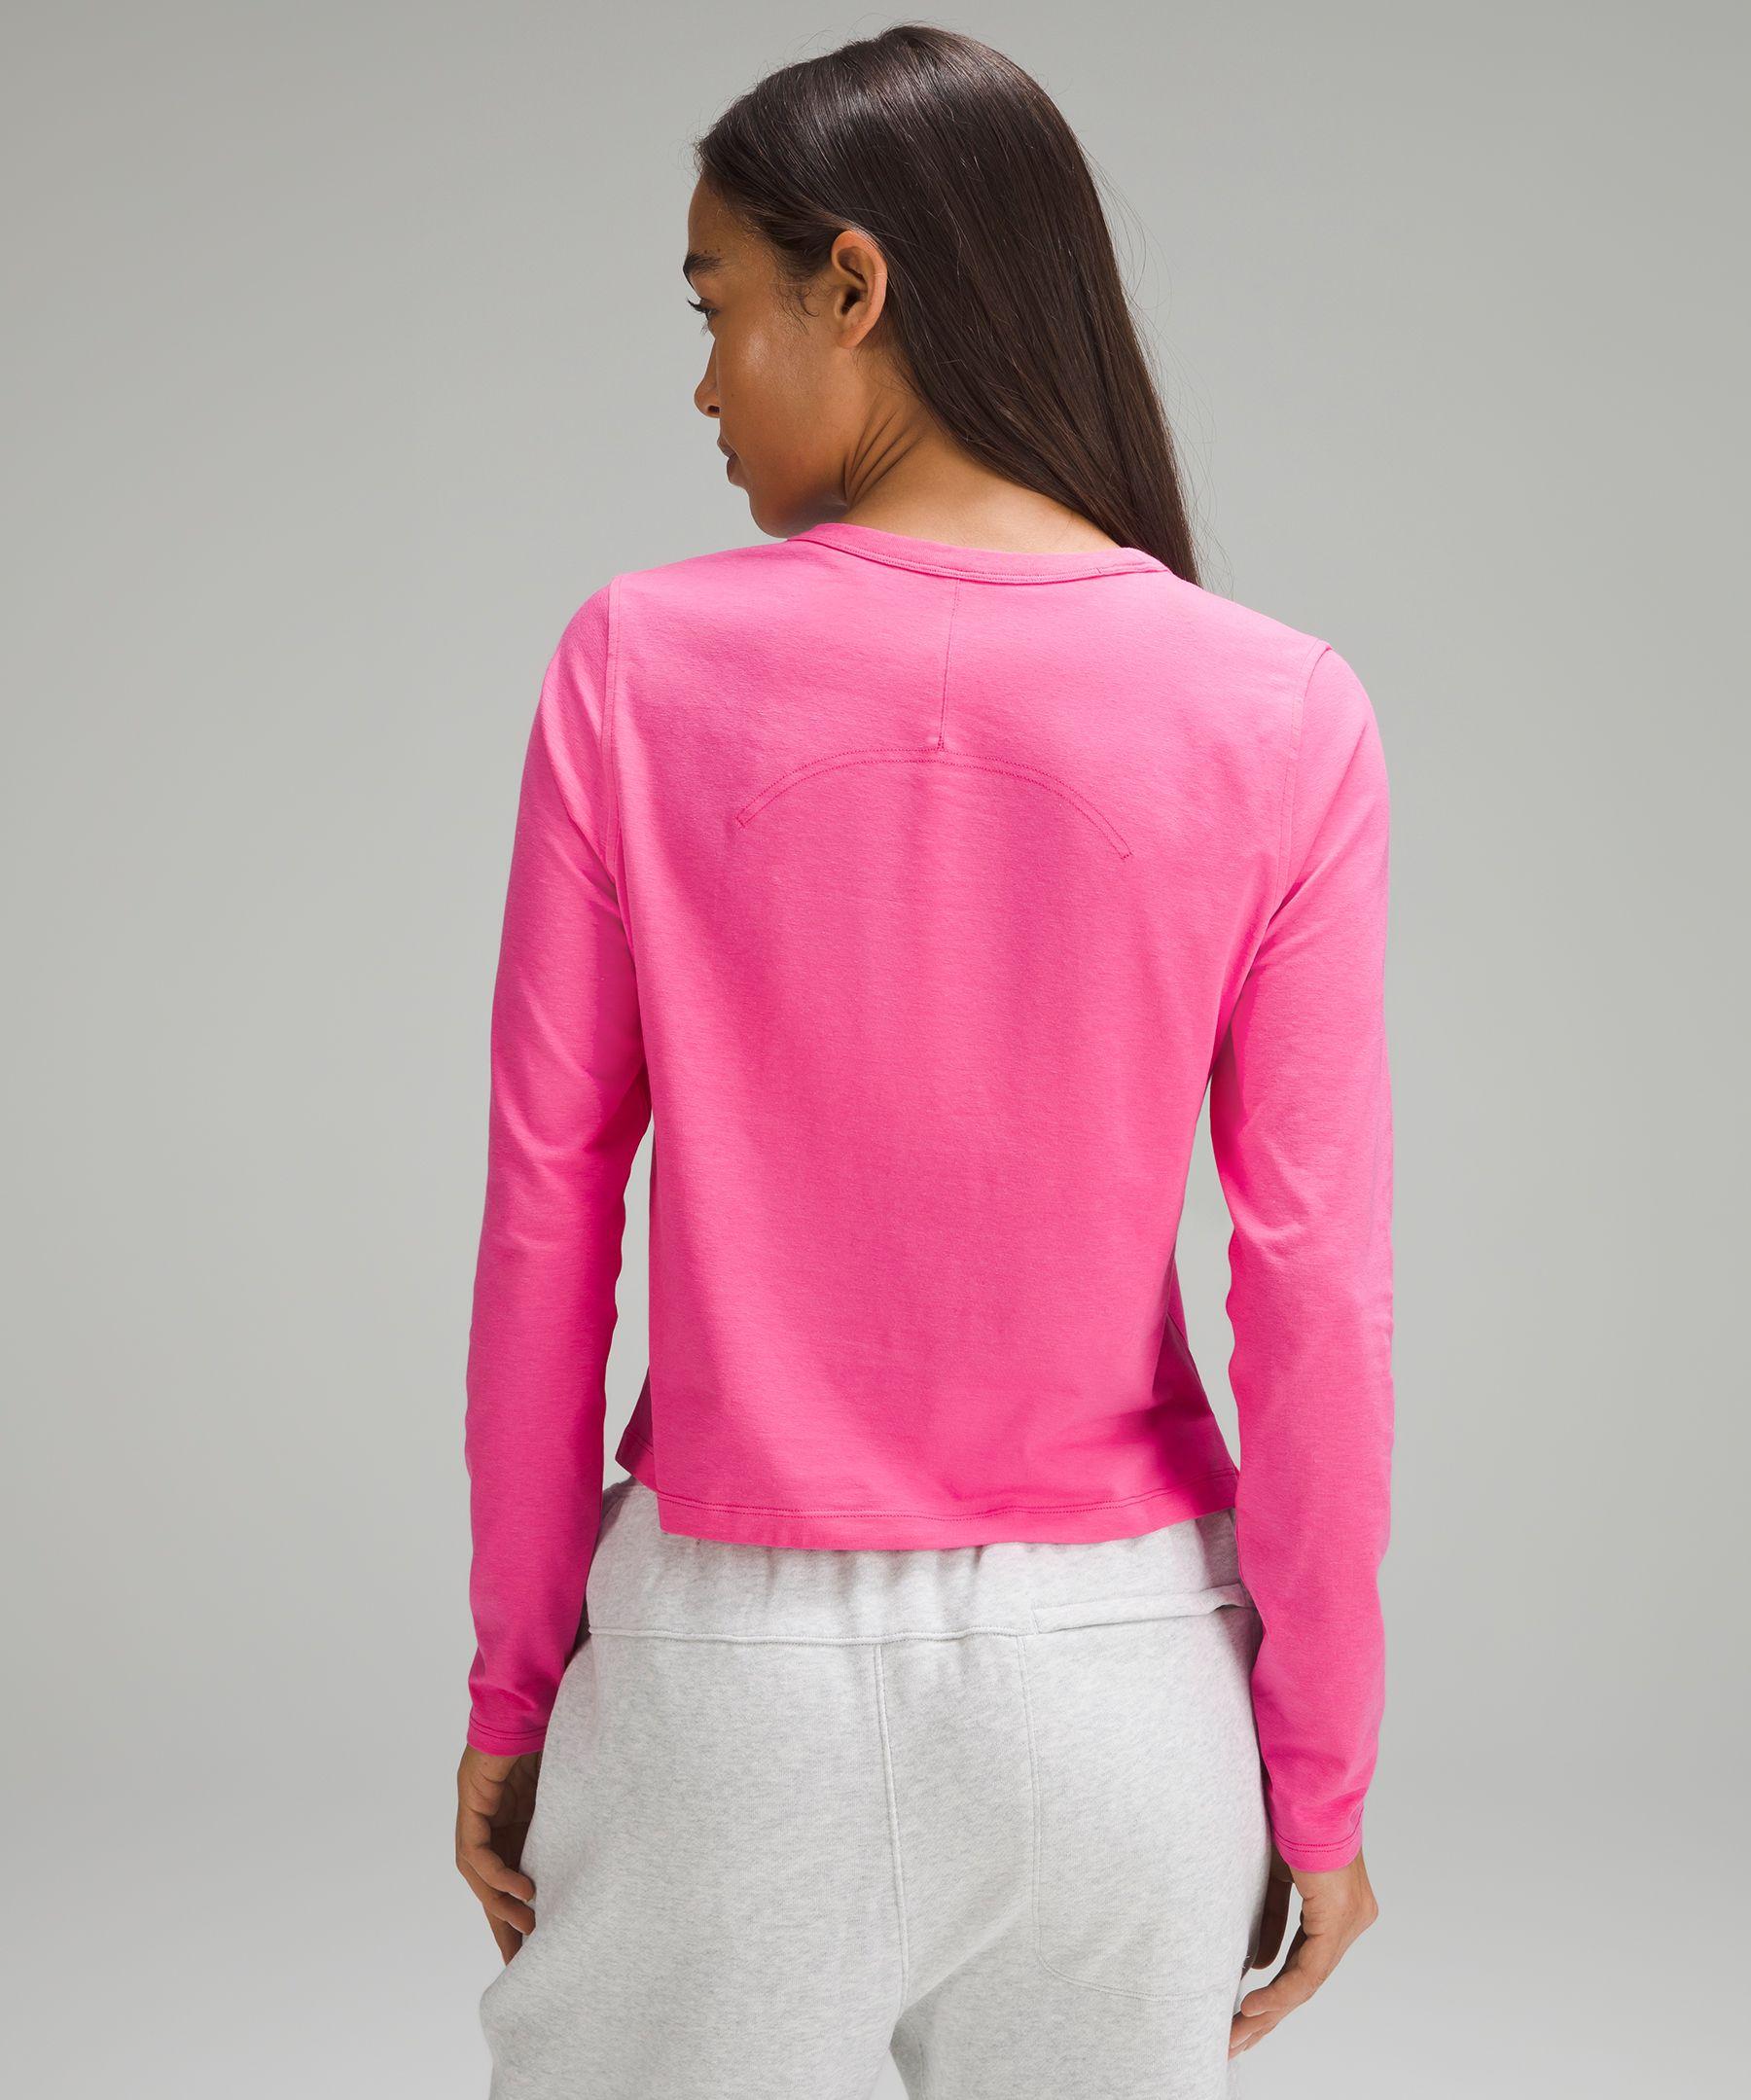 lululemon athletica Classic-fit Cotton-blend Long-sleeve Shirt in